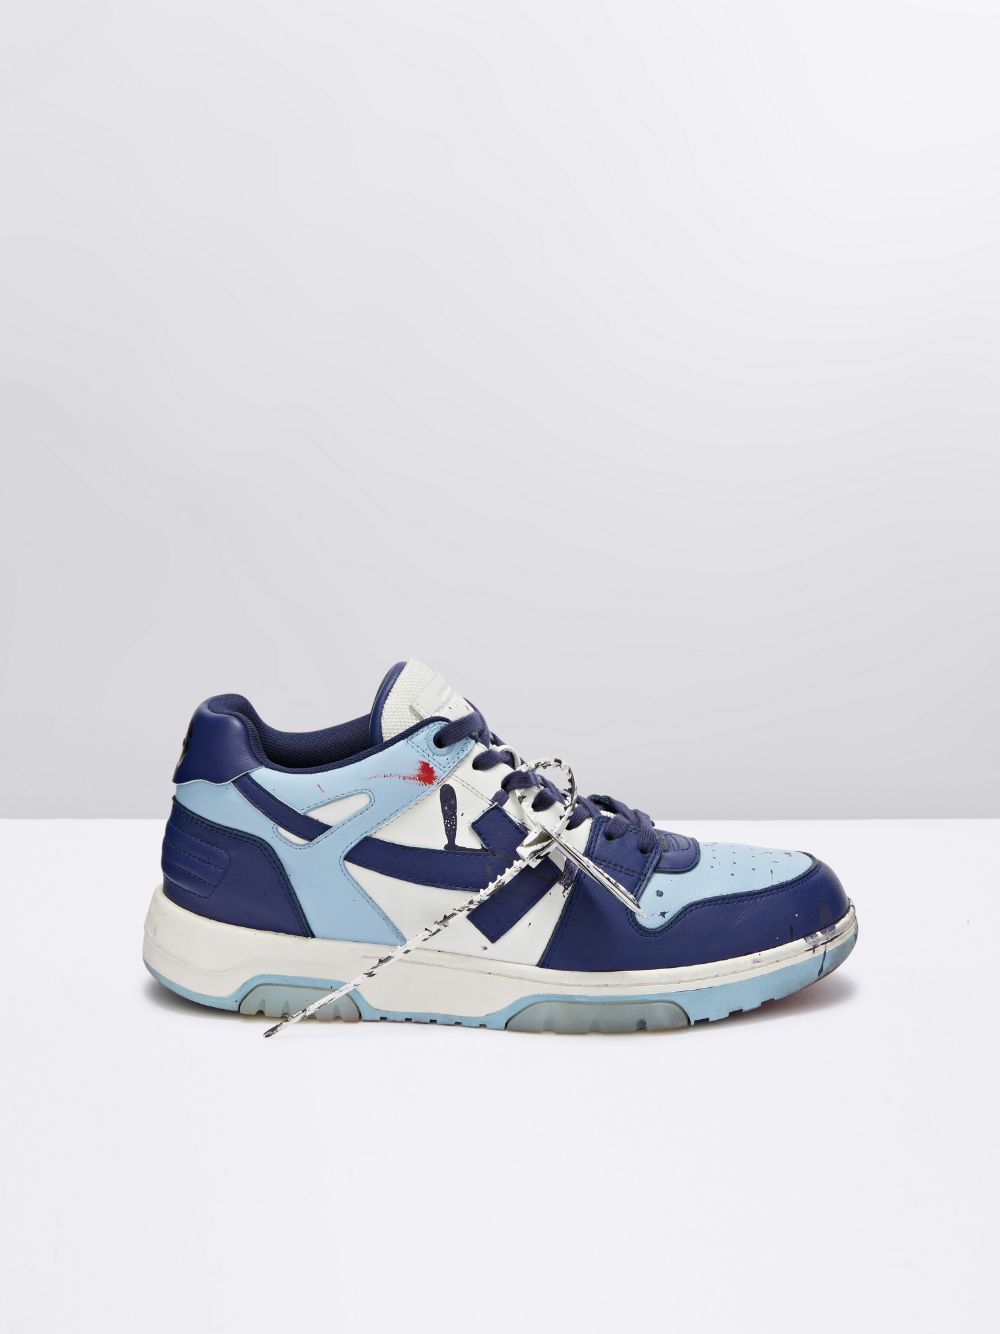 OUT OFFICE "OOO" SNEAKERS blue | Off-White™ Official BE